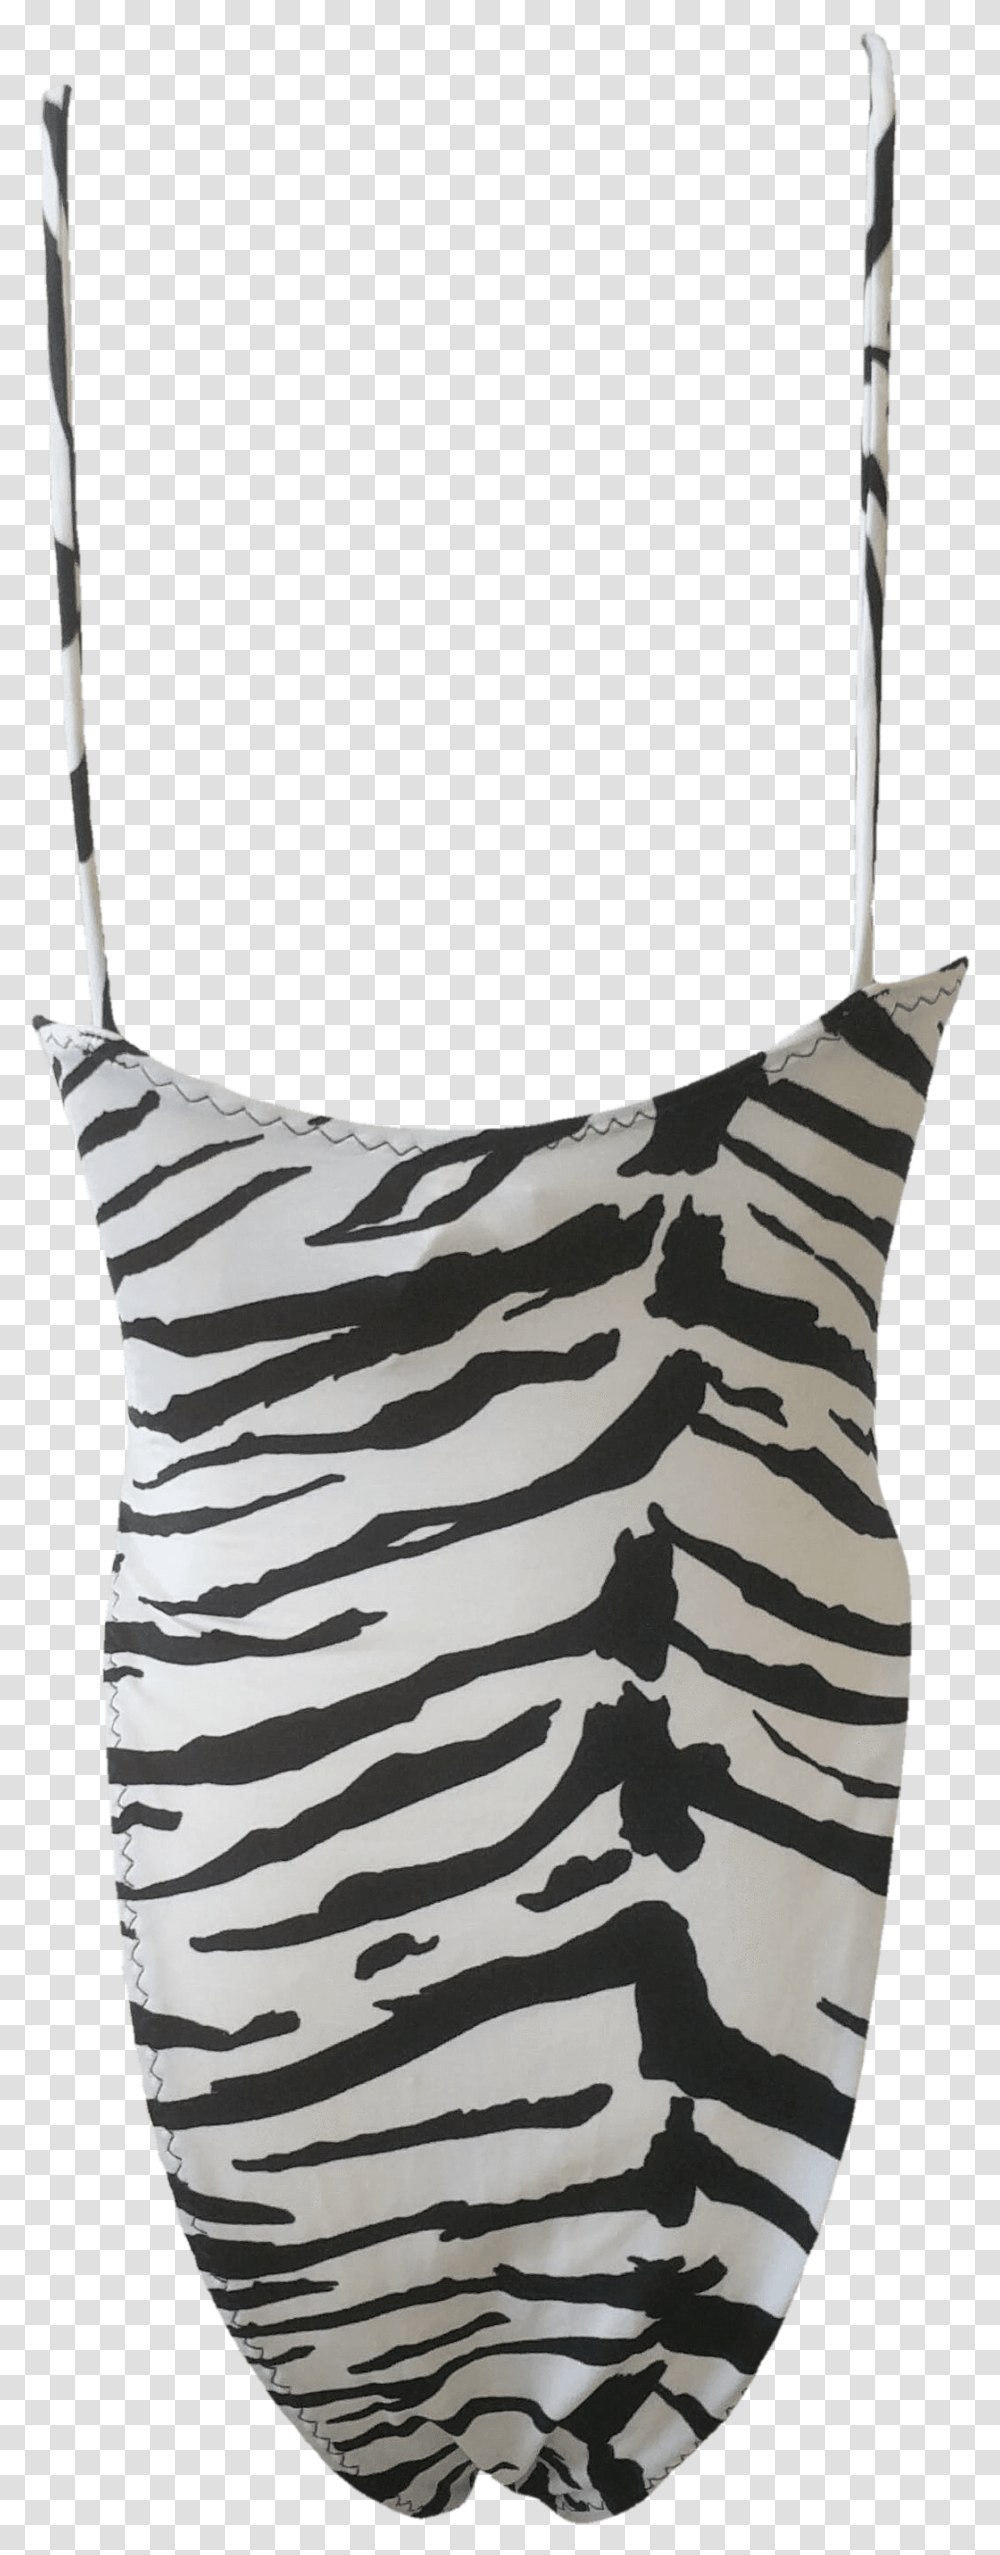 Black And White Zebra Strip Body Suit By Frederick One Piece Swimsuit, Pillow, Cushion, Rug Transparent Png